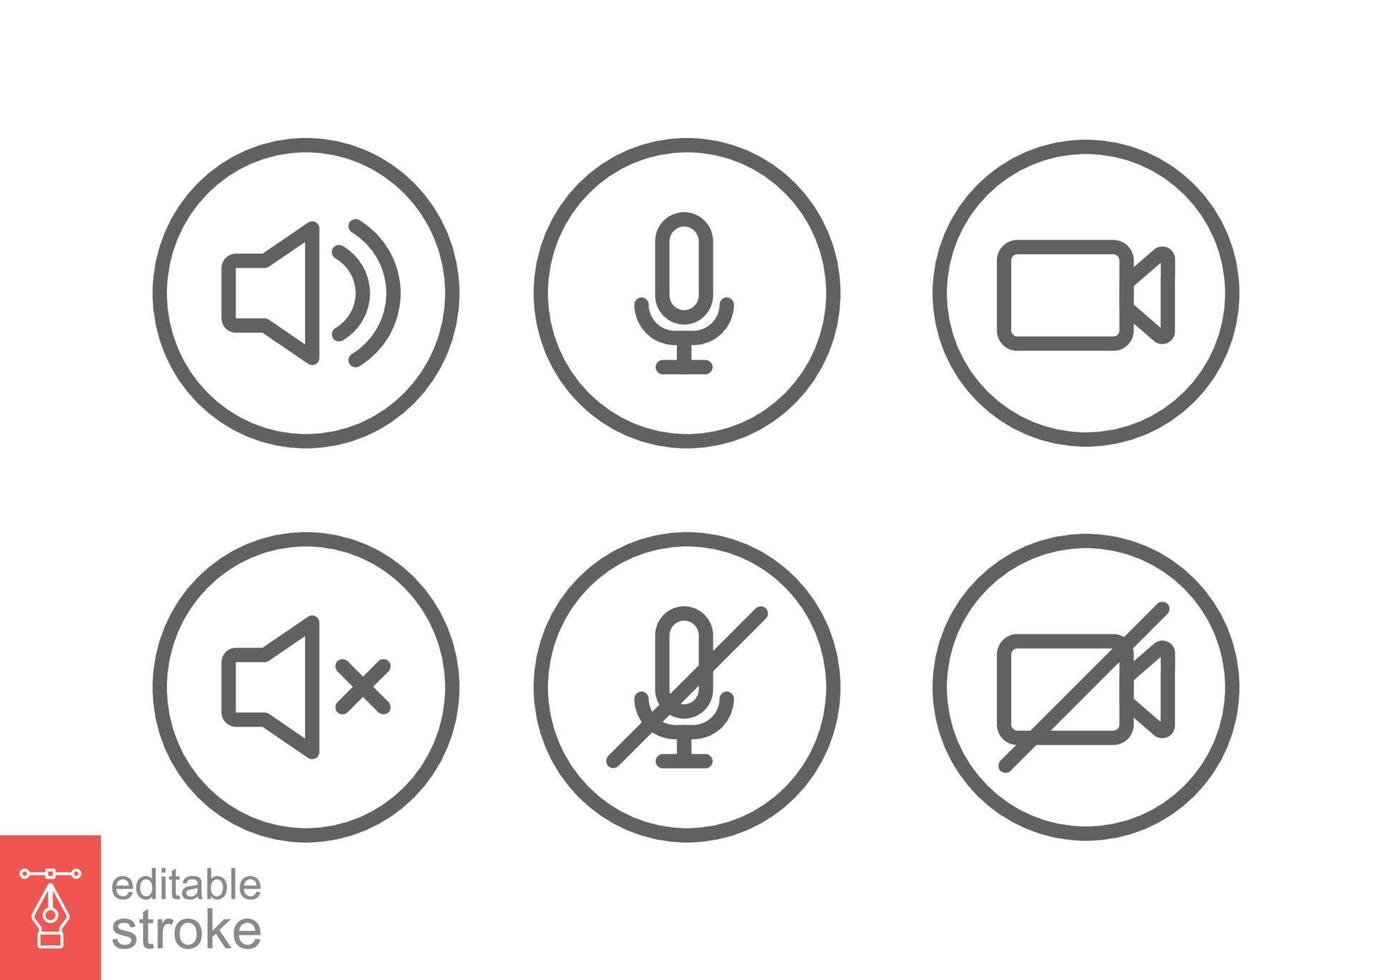 Speaker, Mic and Video Camera line icon set. Simple outline style for Video Conference, Webinar and Video chat. Microphone, audio, sound, mute, off concept. Vector isolated, editable stroke EPS 10.